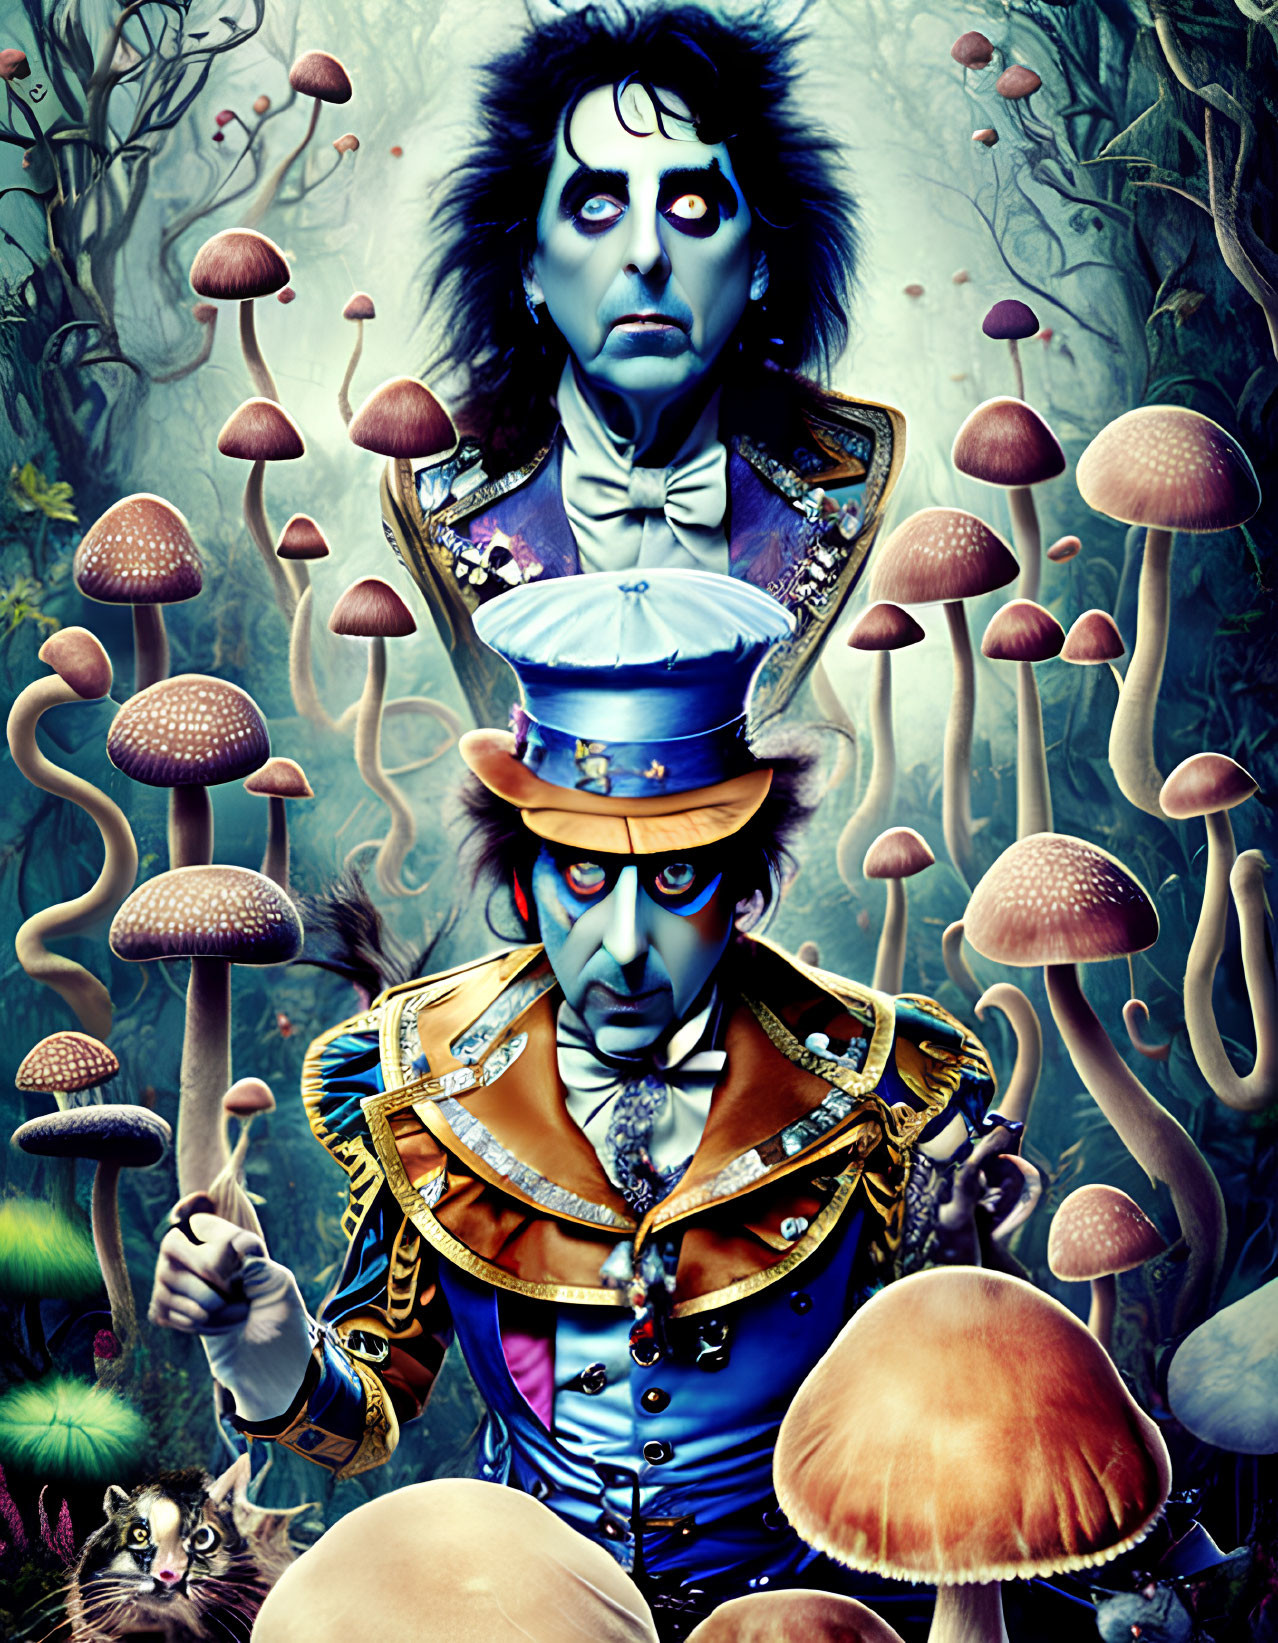 Surreal character in blue hat and ornate jacket with cat among oversized mushrooms in dreamlike forest